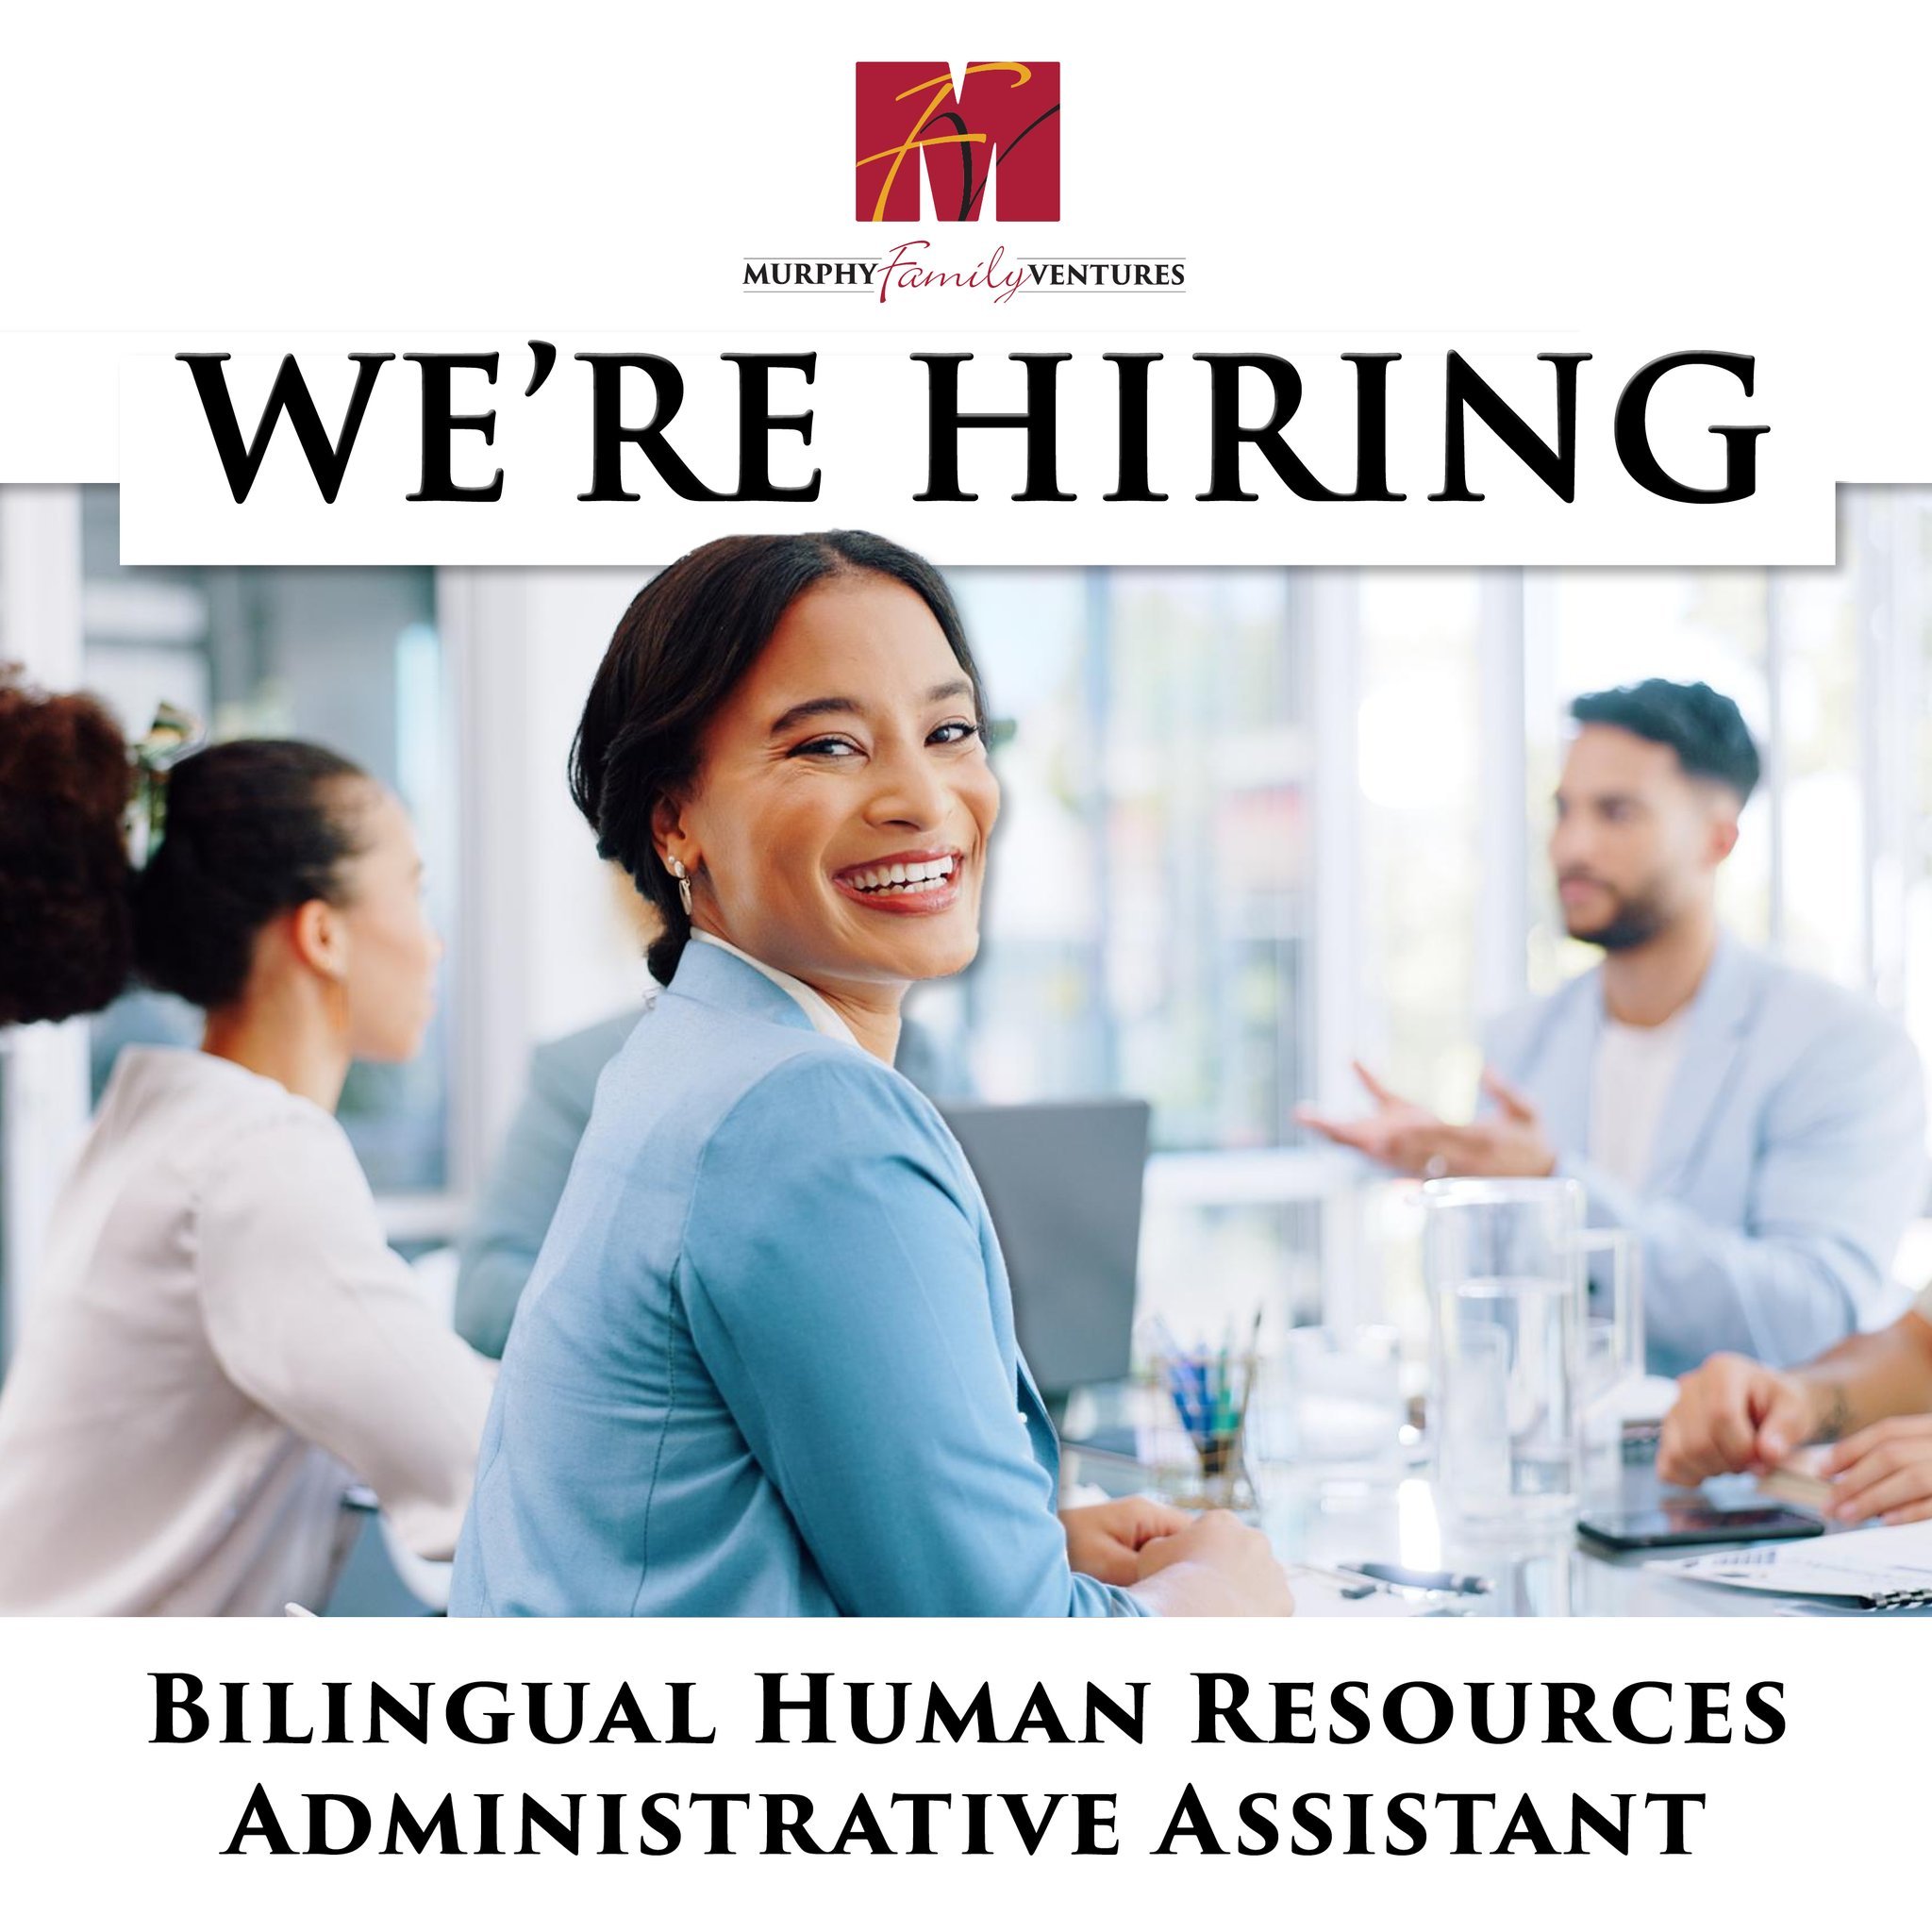 We are hiring a full-time bilingual administrative assistant for our HR Department in Nevada, MO! Apply now by visiting the link in our bio or https://www.murphyfamilyventures.com/careers !

Requirements:
⭐ Bilingual in Spanish and English (verbal an